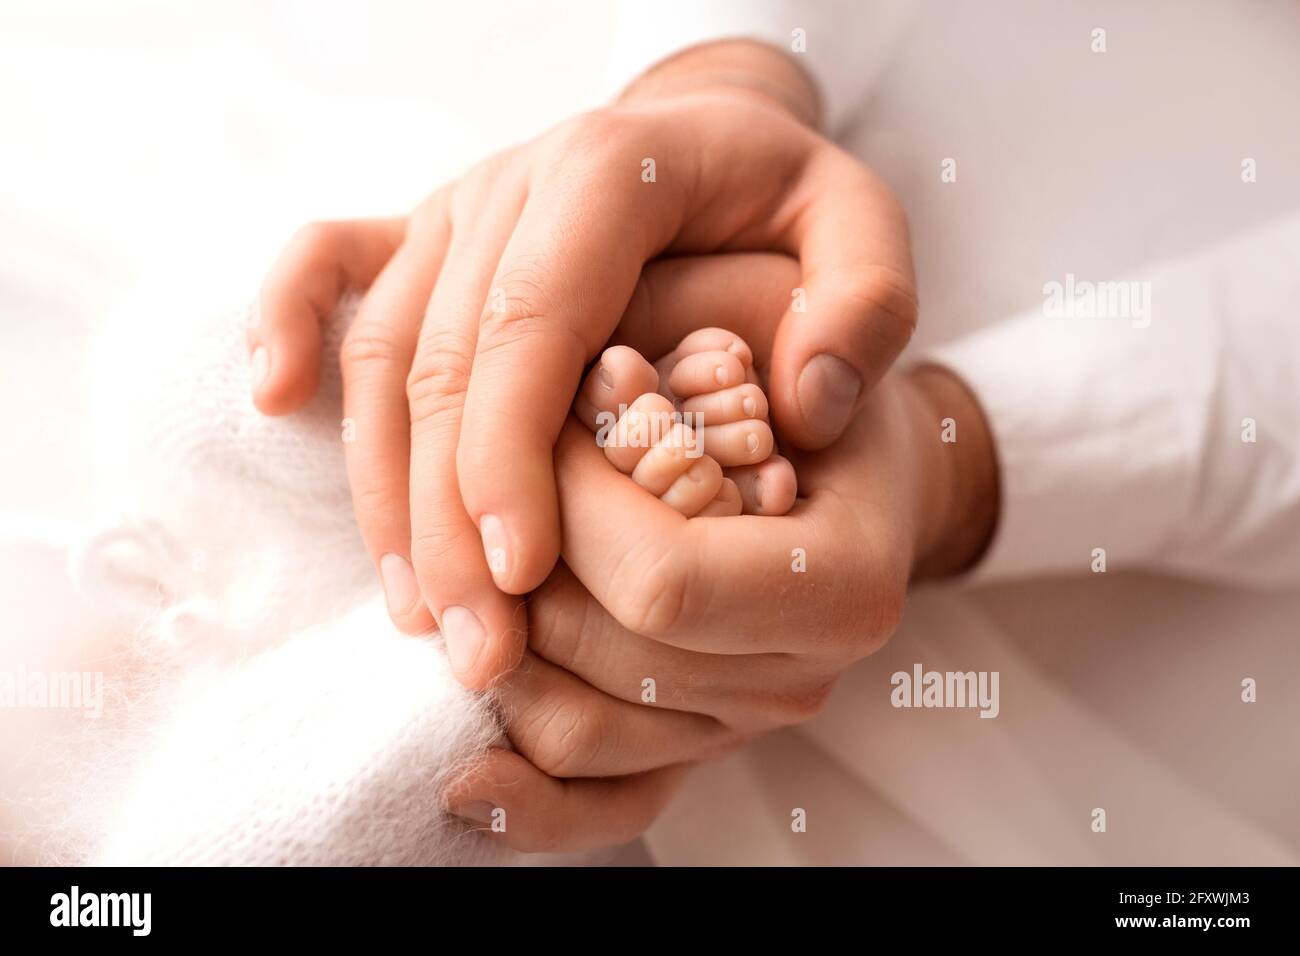 Children's feet in hold hands of mother and father. Mother, father and Child. Happy Family people concept. Stock Photo